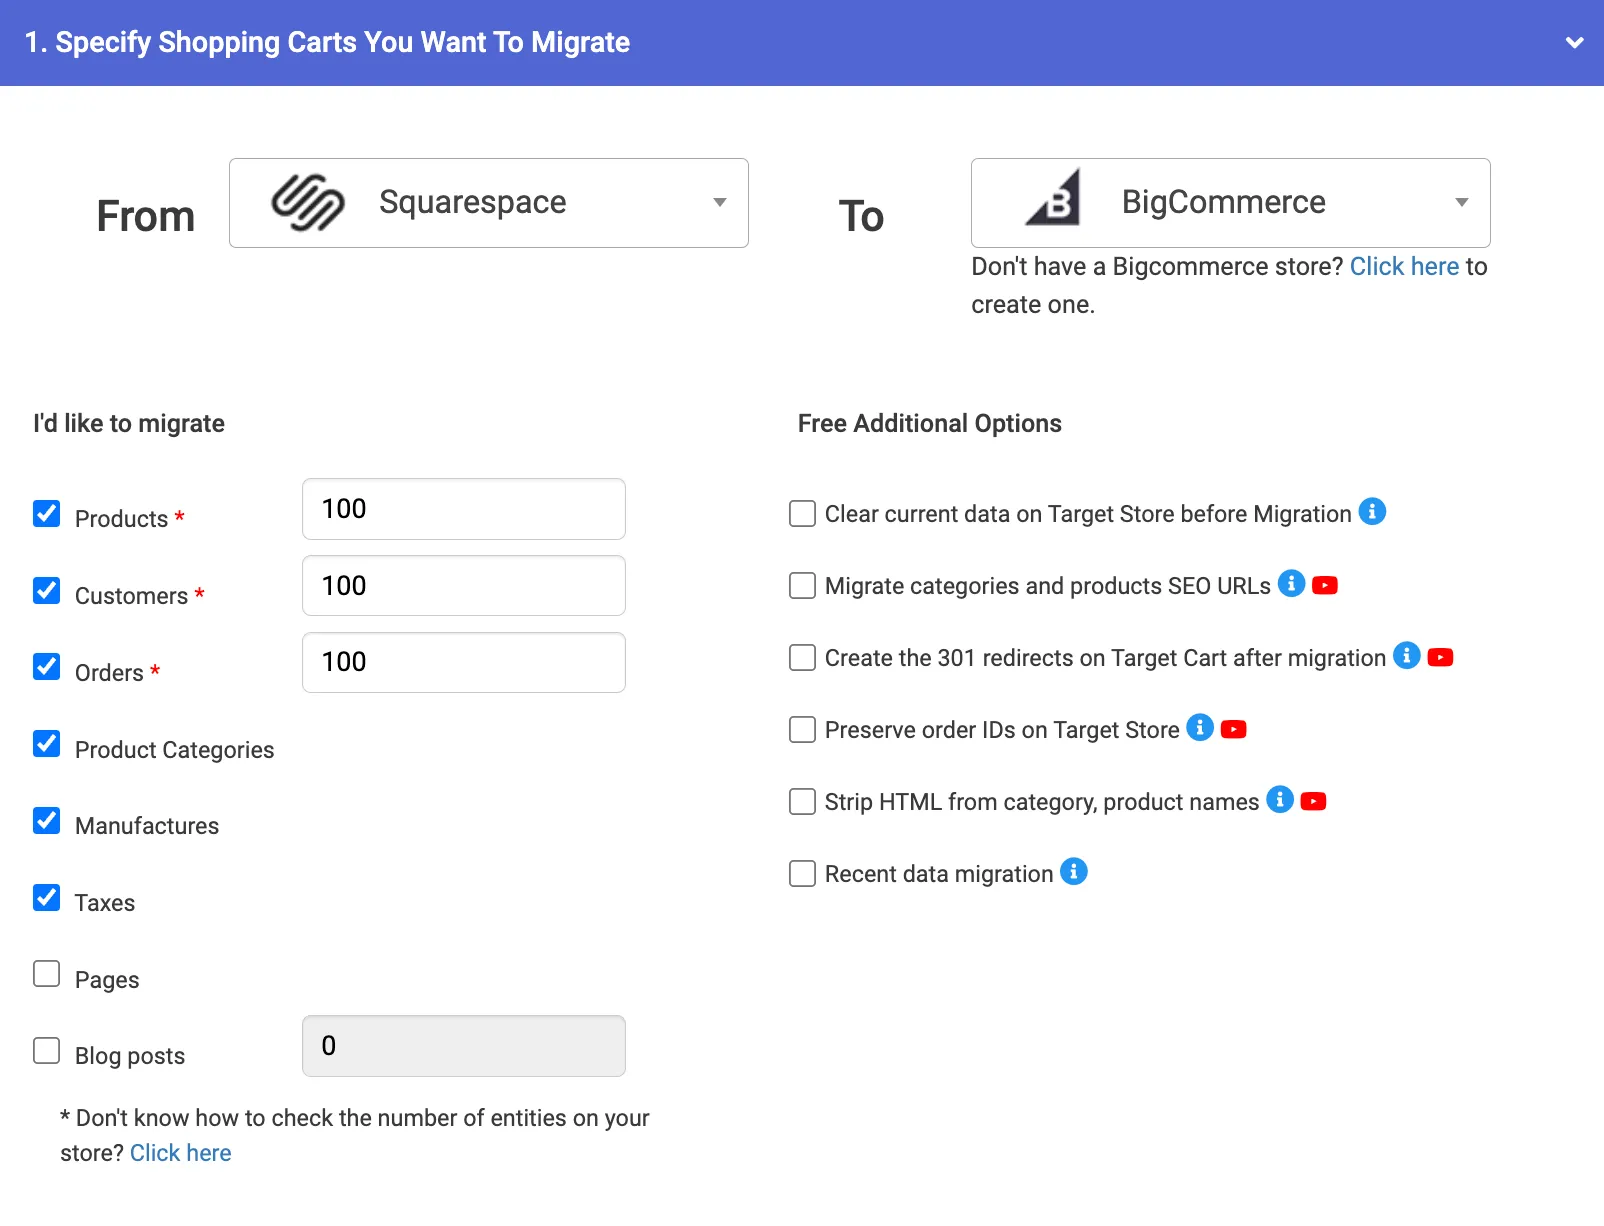 Specify Squarespace and BigCommerce carts for your migration